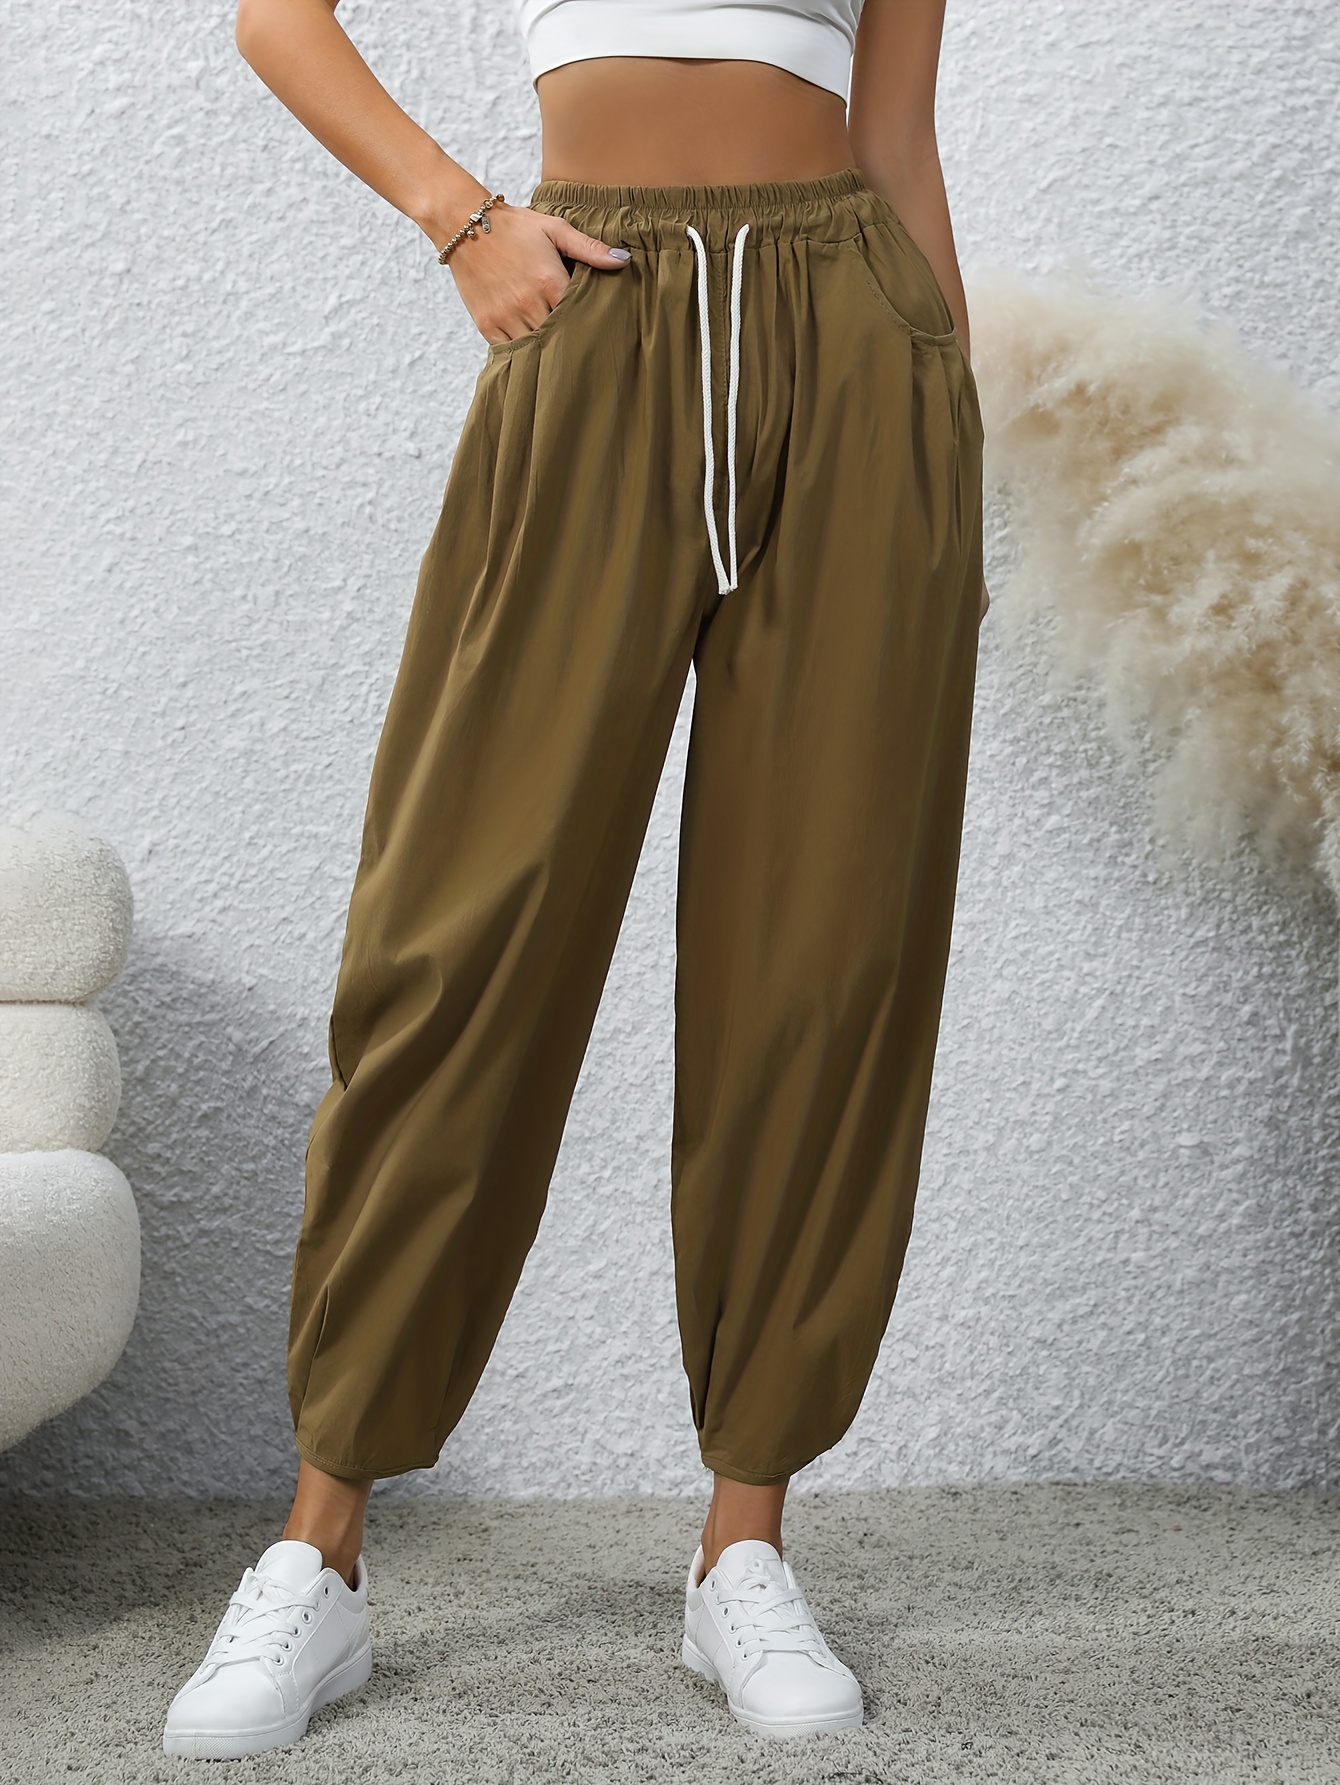 ZHAGHMIN Baggy Jogger Pants Womens Ladies Solid Color Drawstring